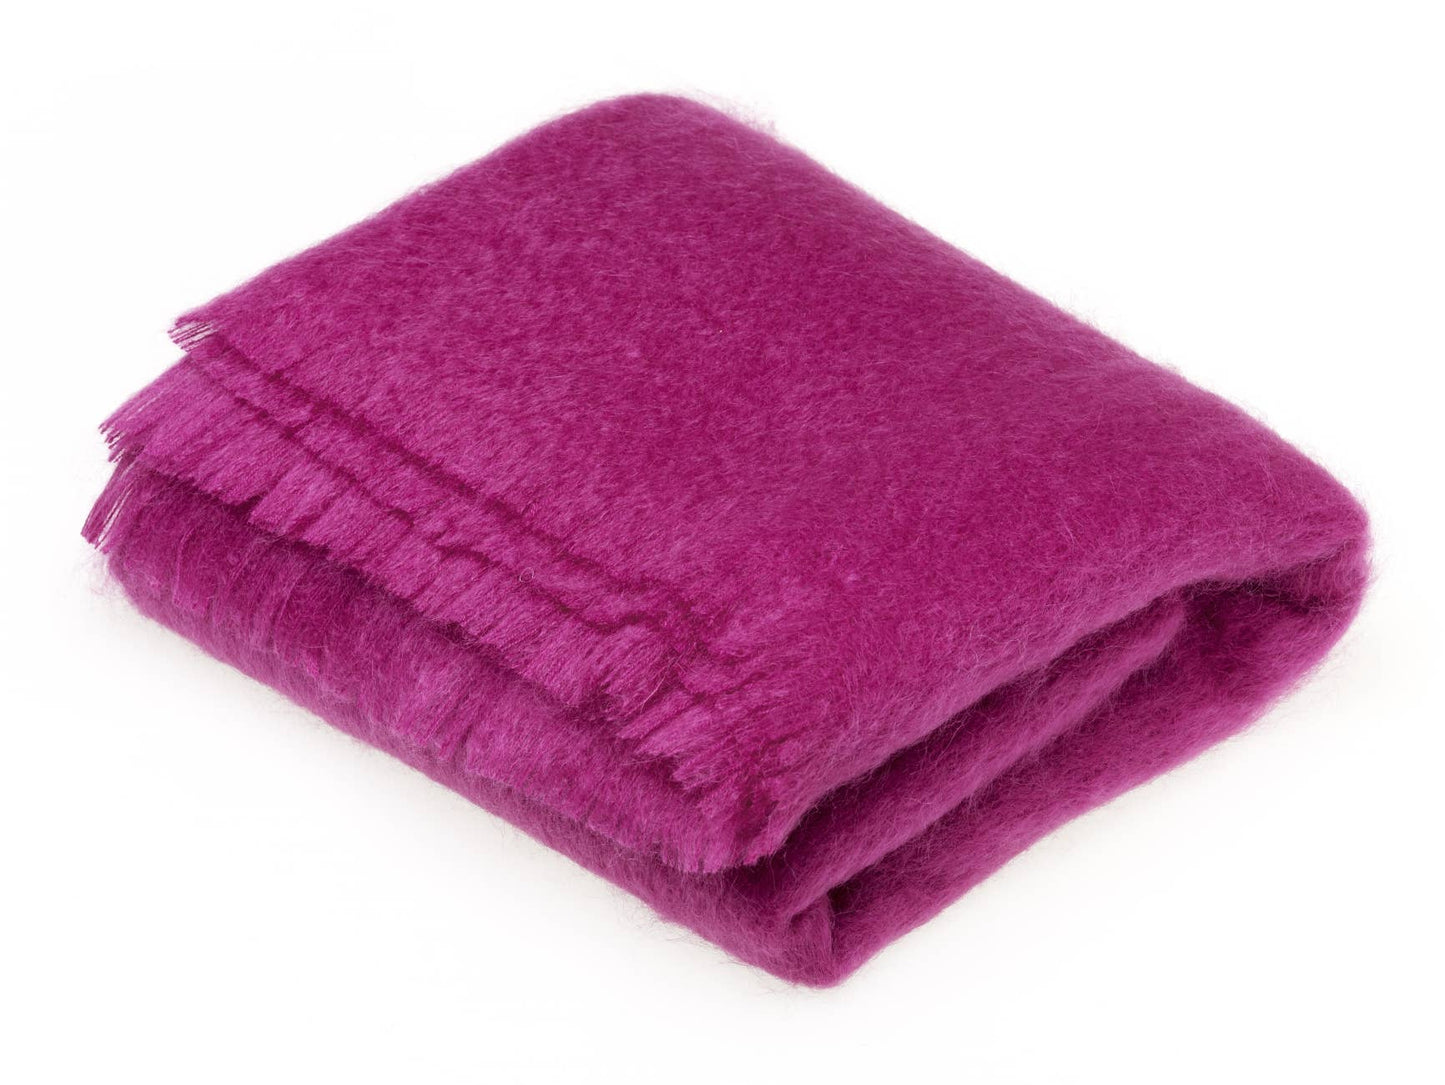 Luxury Mohair Throw Collection - Made in England: Petunia